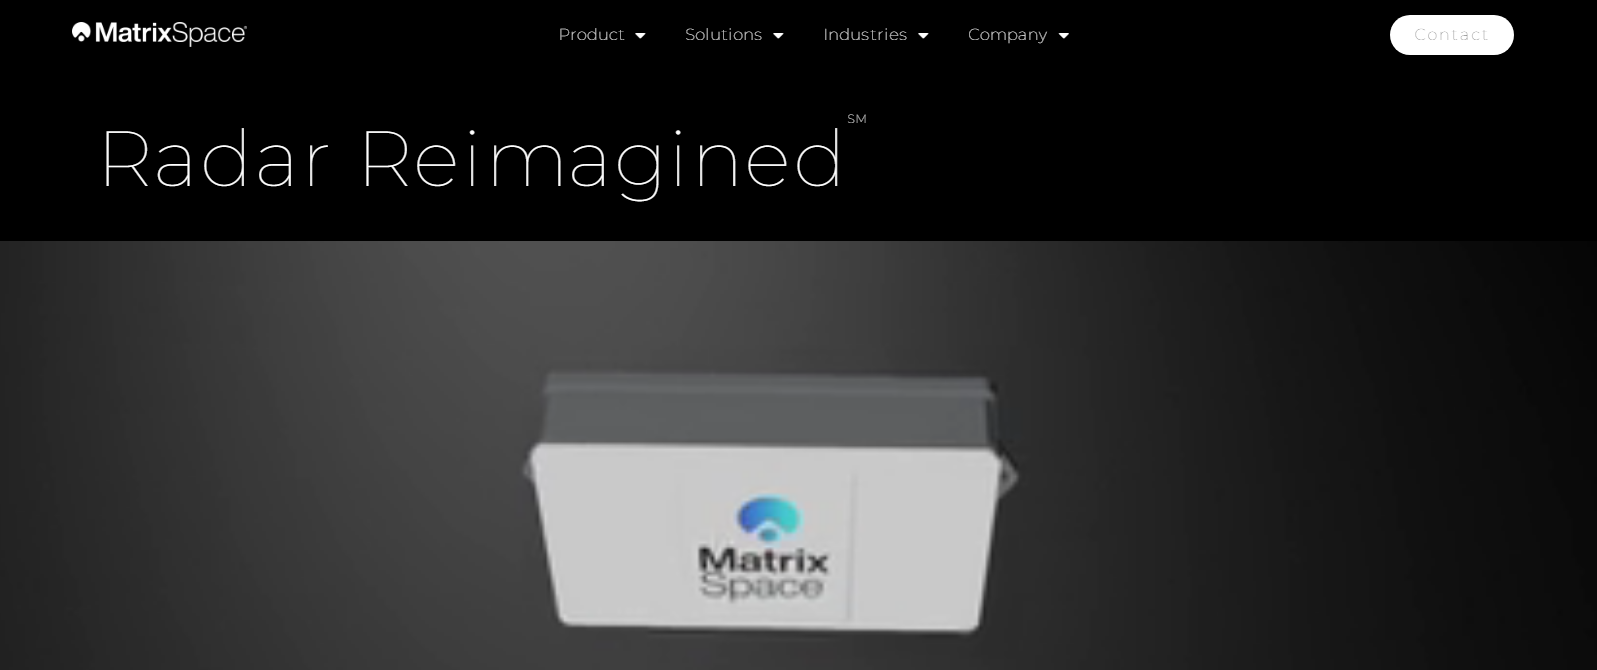 MatrixSpace Raises $10 Million in Series A Funding Led by Intel Capital.